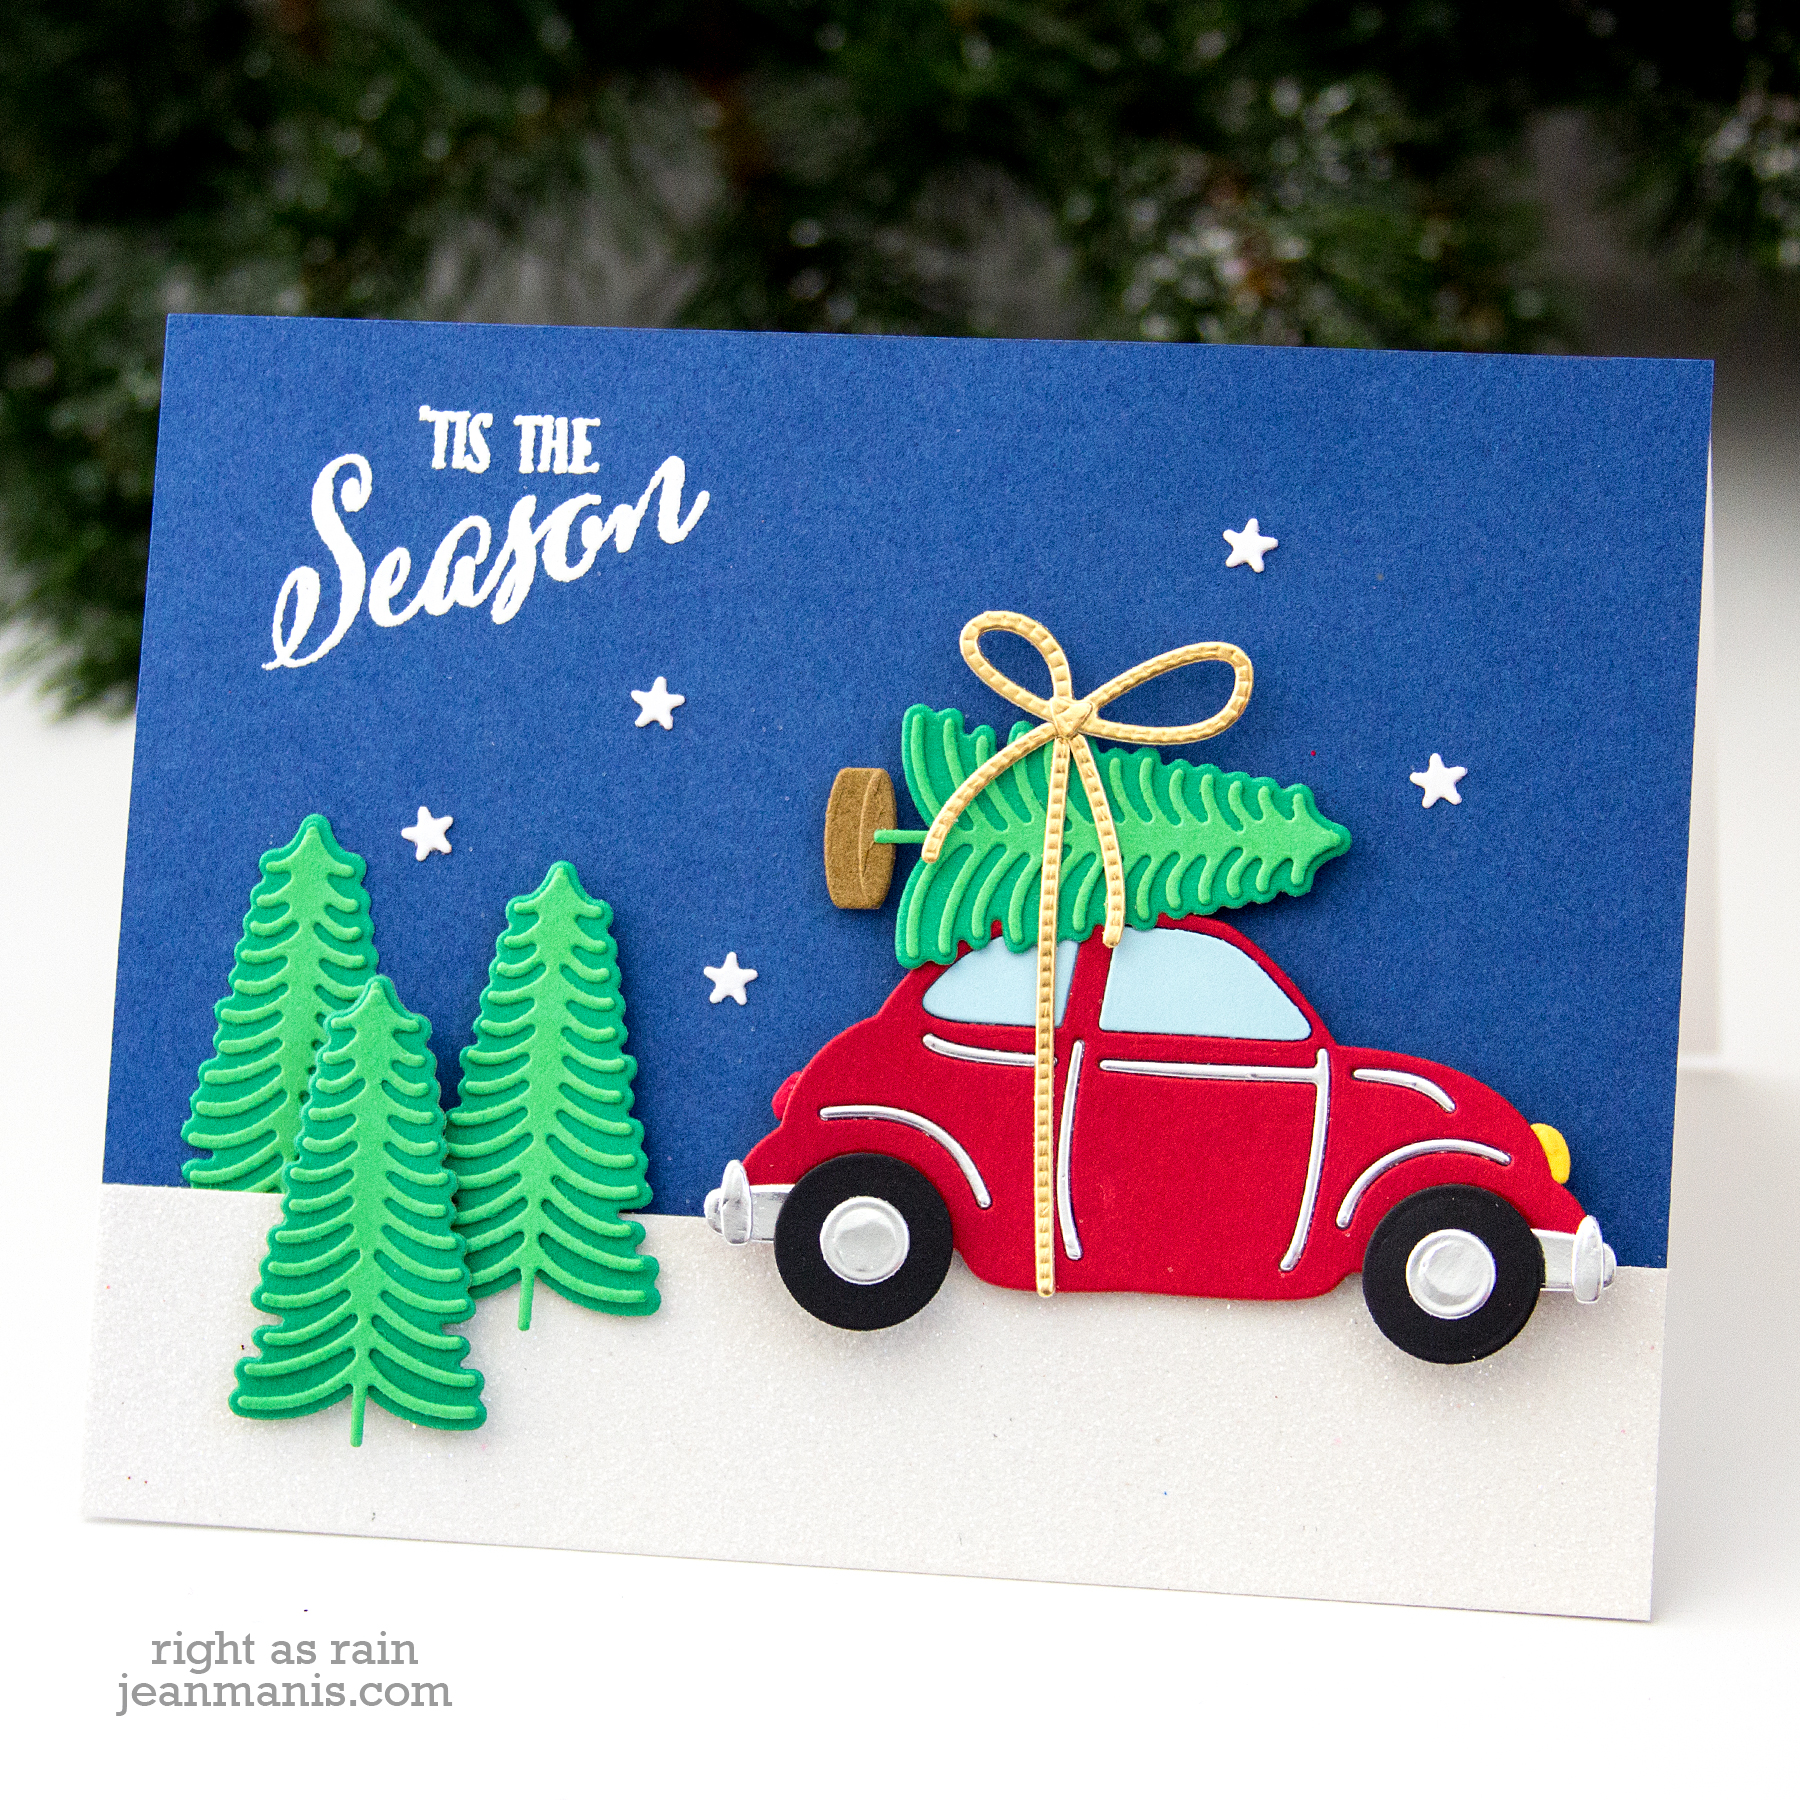 Spellbinders 2019 Limited Edition Merry Everything Christmas Kit